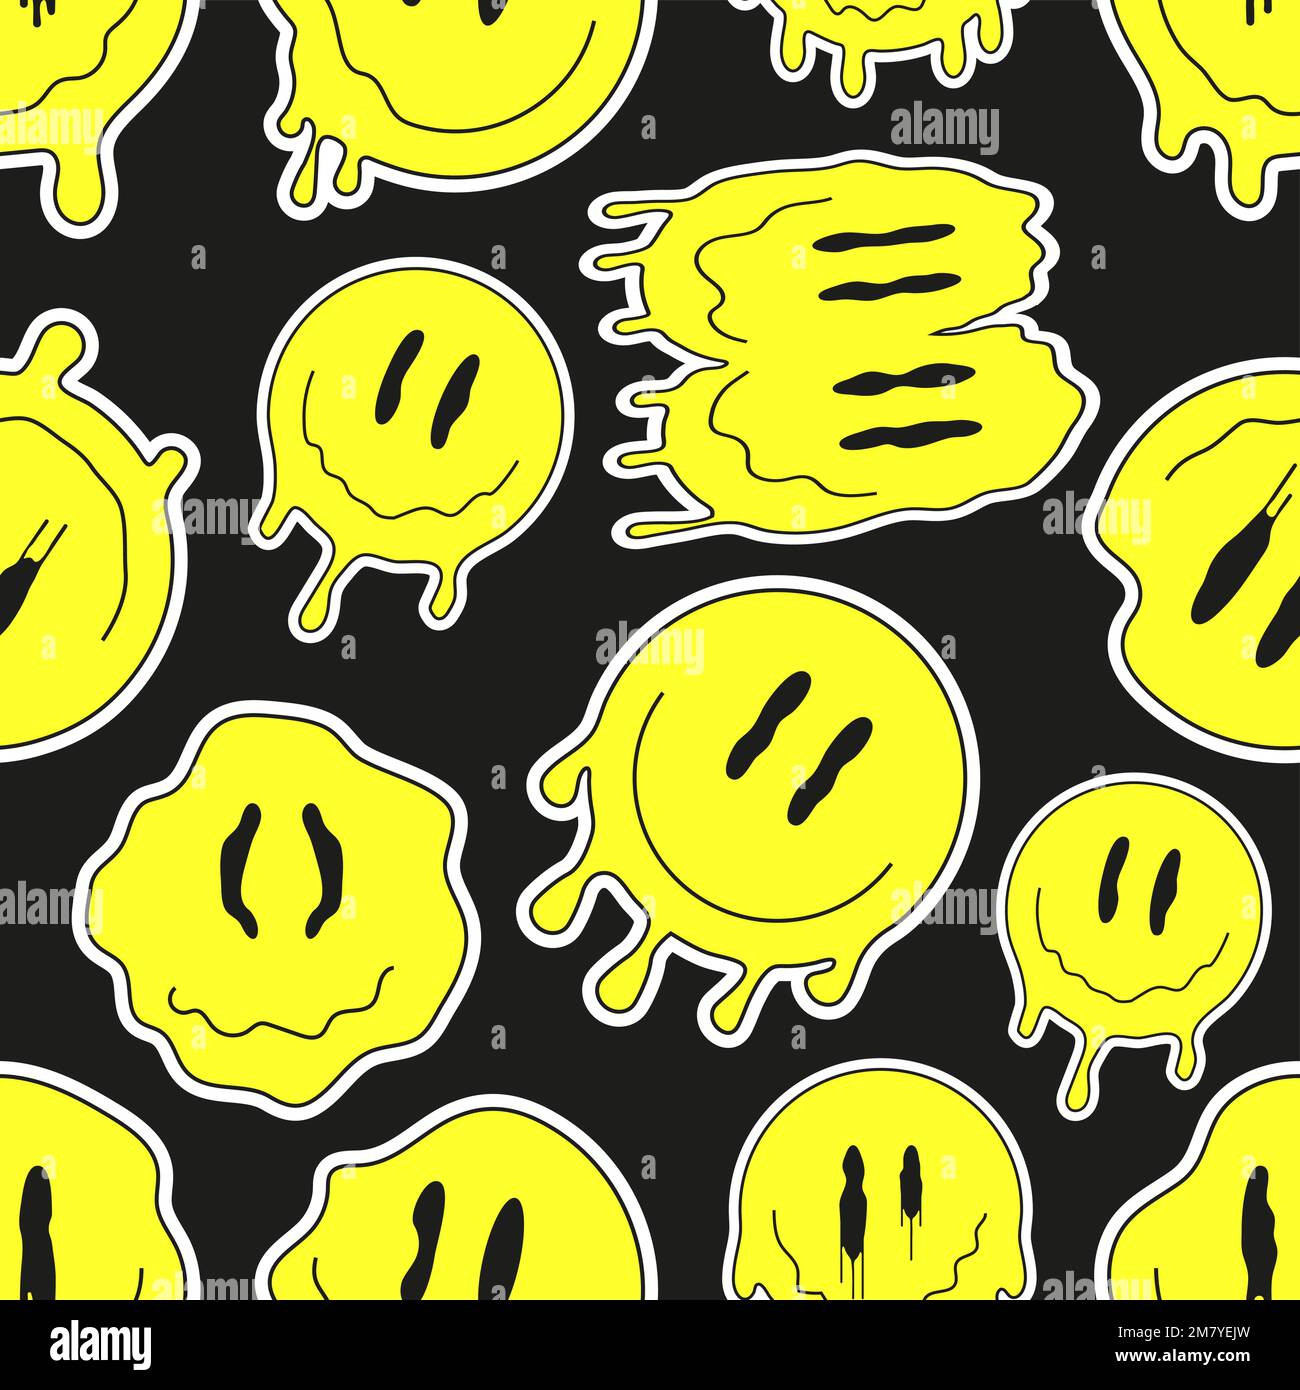 Download Pyschedelic Y2k Seamless Aesthetic Trippy Smiley Face Wallpaper   Wallpaperscom